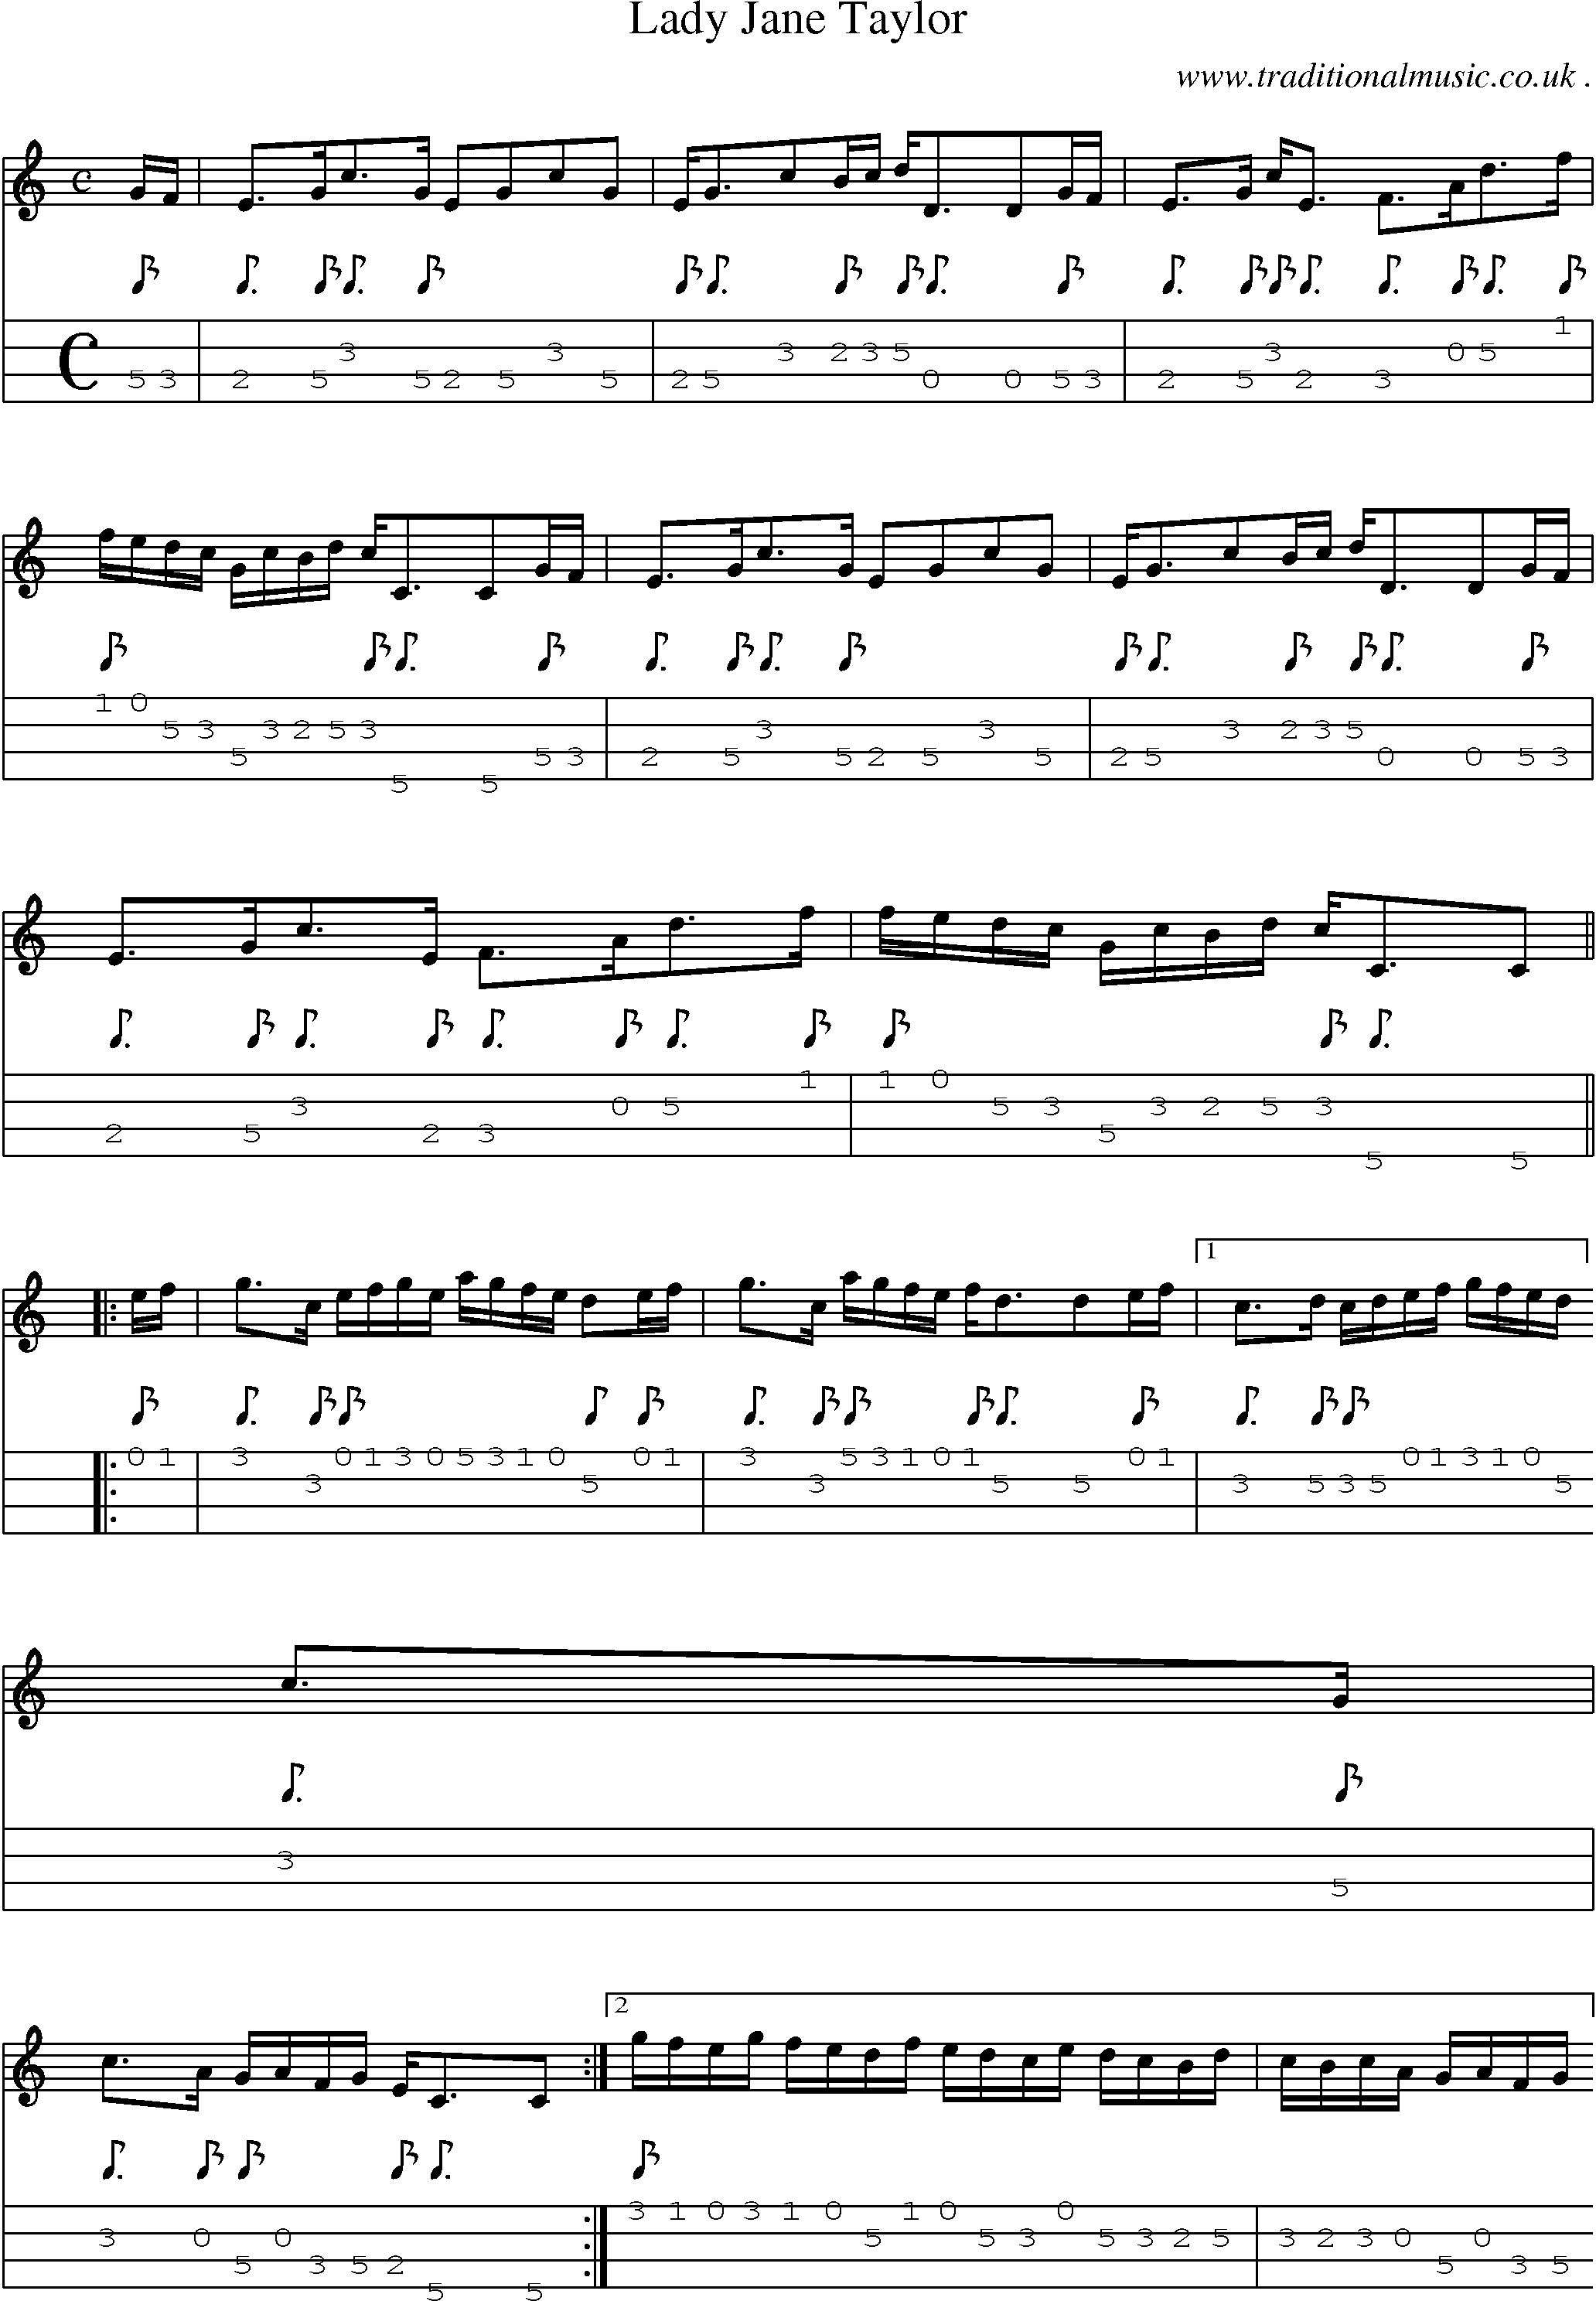 Sheet-music  score, Chords and Mandolin Tabs for Lady Jane Taylor